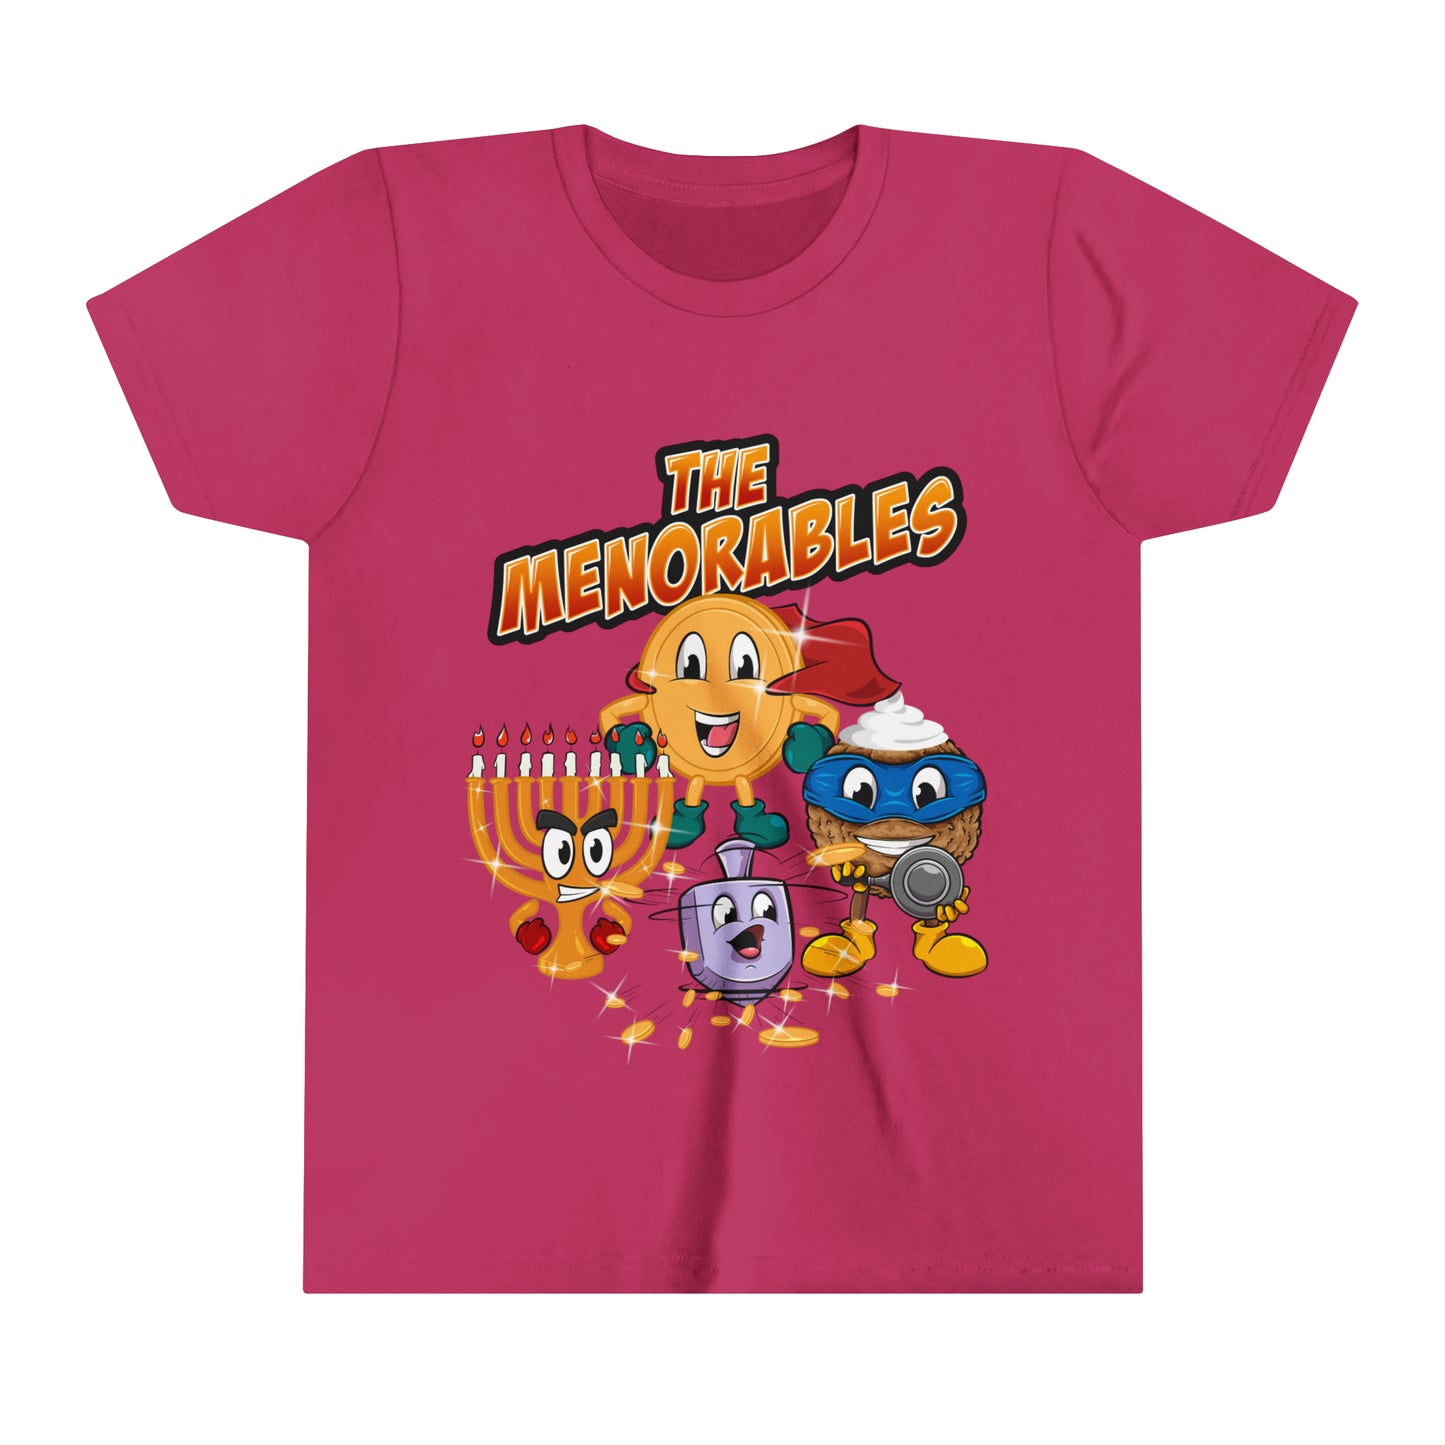 The Menorables Youth Tee